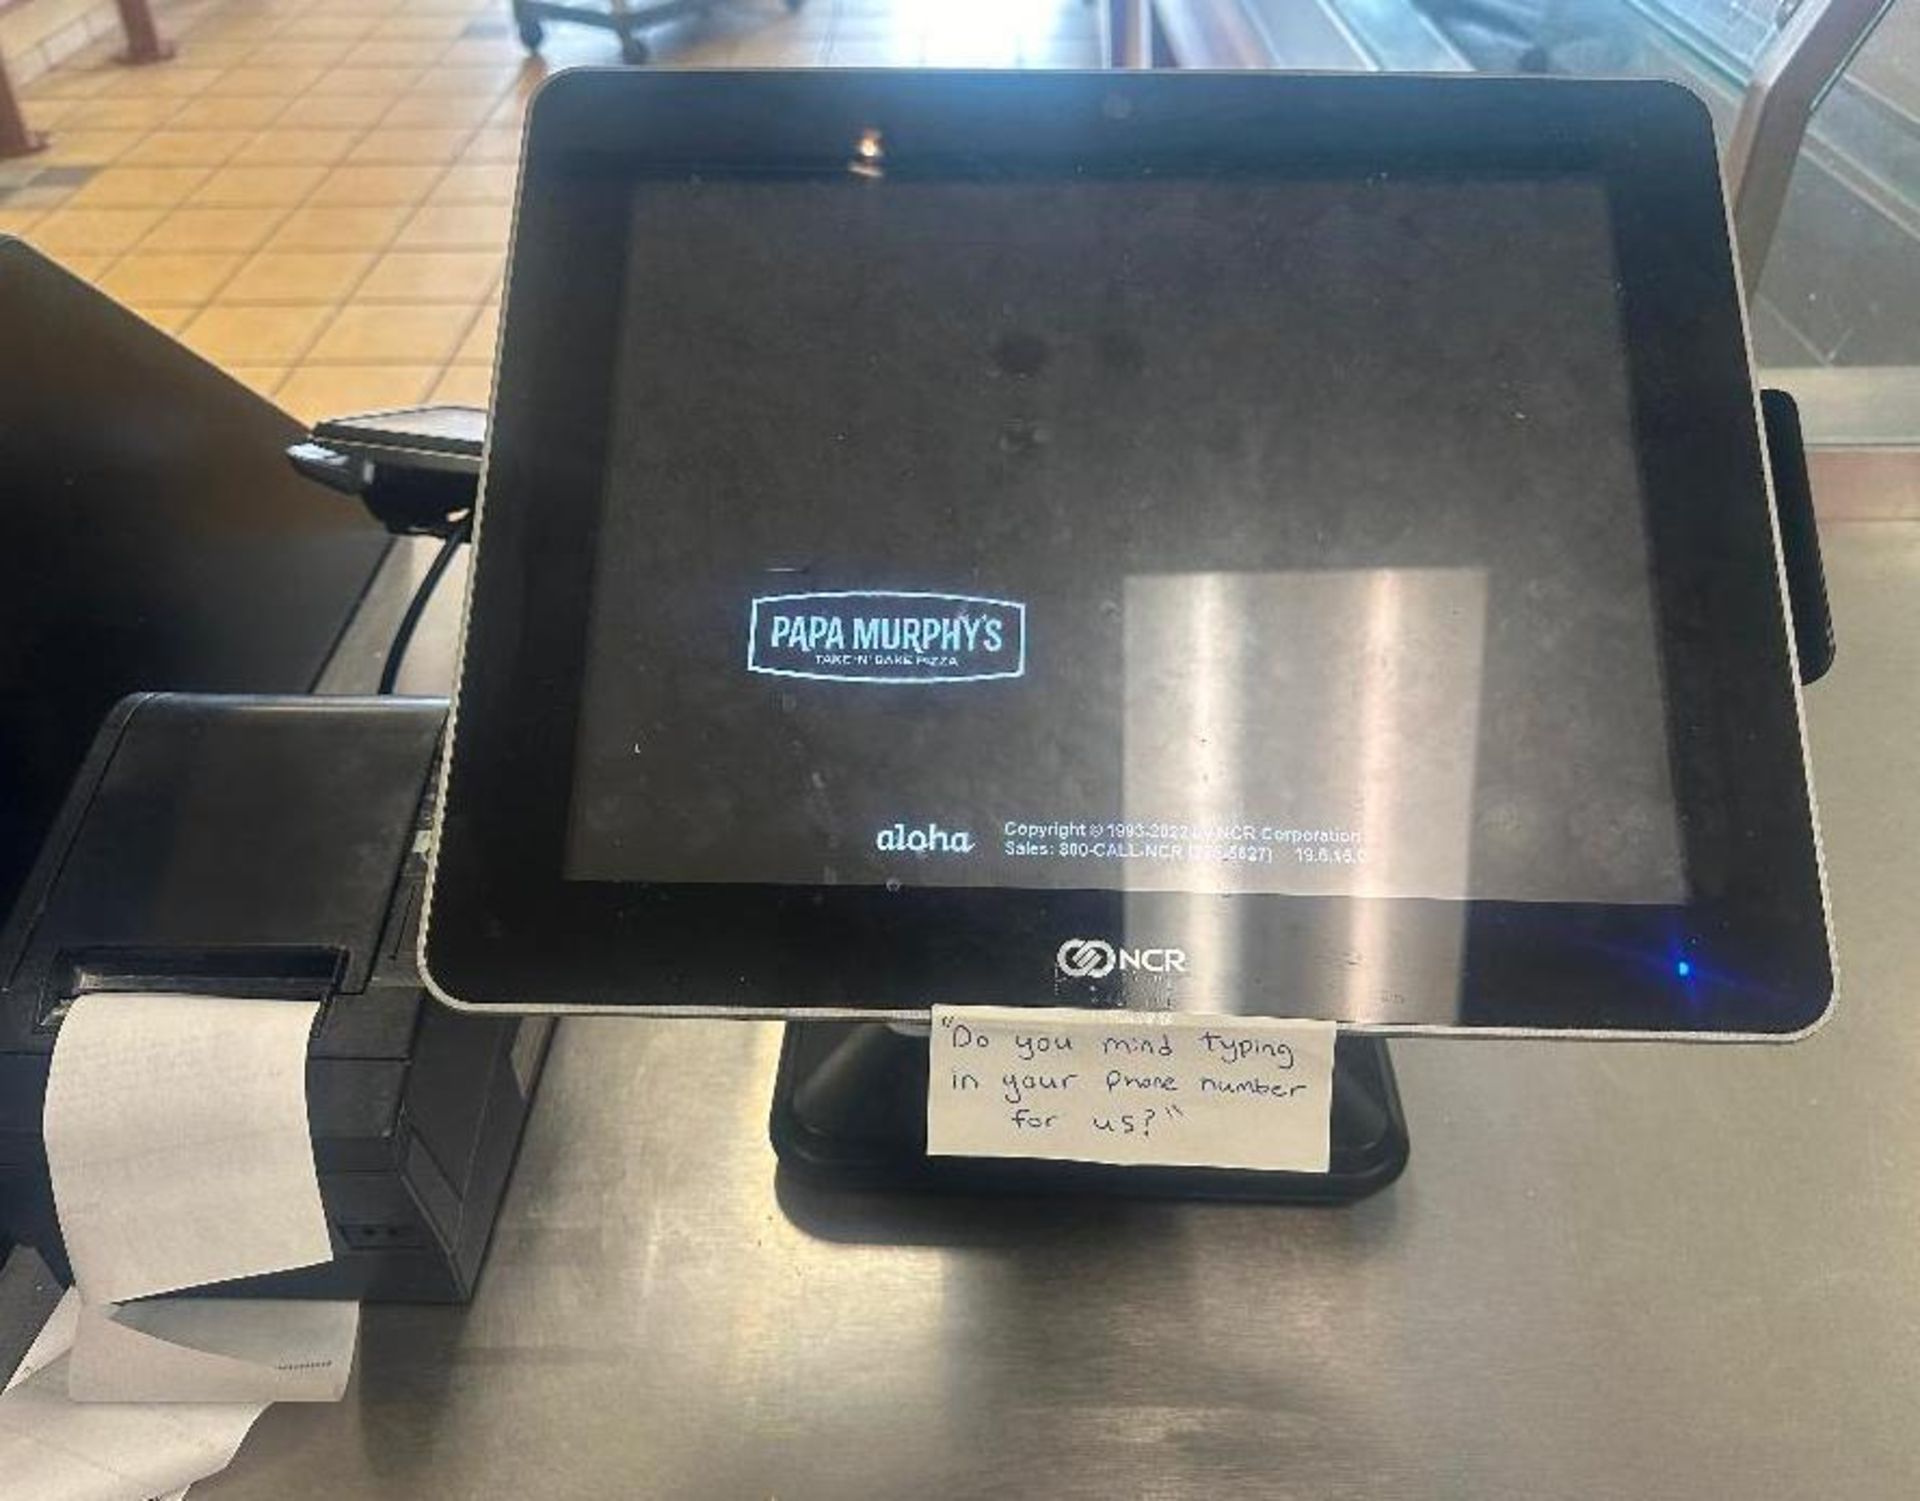 DESCRIPTION (3) TERMINAL NCR TOUCH SCREEN POINT OF SALE SYSTEM W/ BACK OFFICE COMPUTER AND DONGLE. A